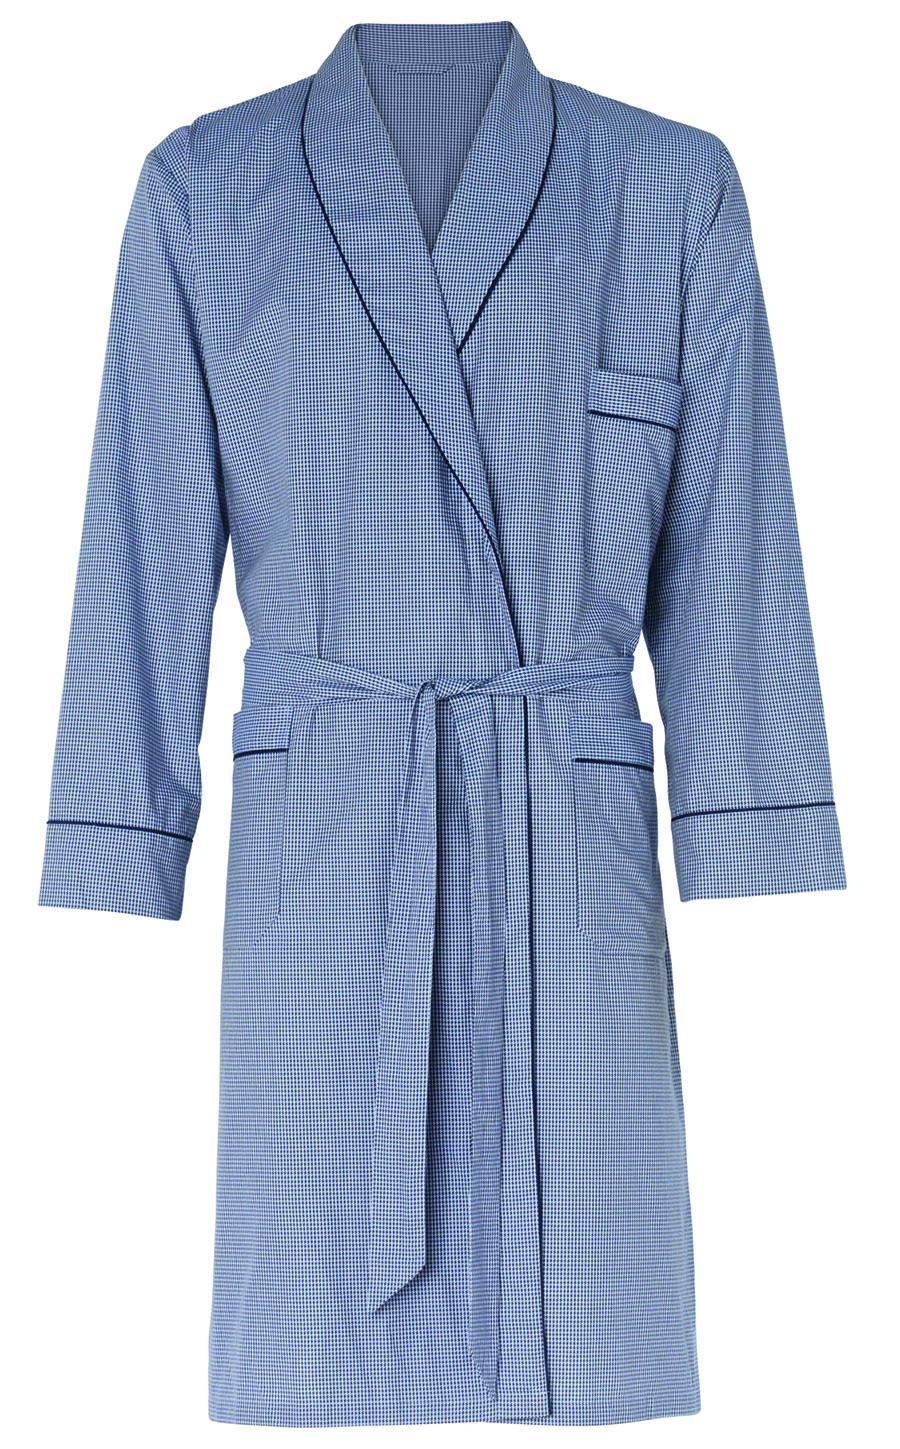 M&S, David Gandy for Autograph dogtooth print woven dressing gown, £39.50